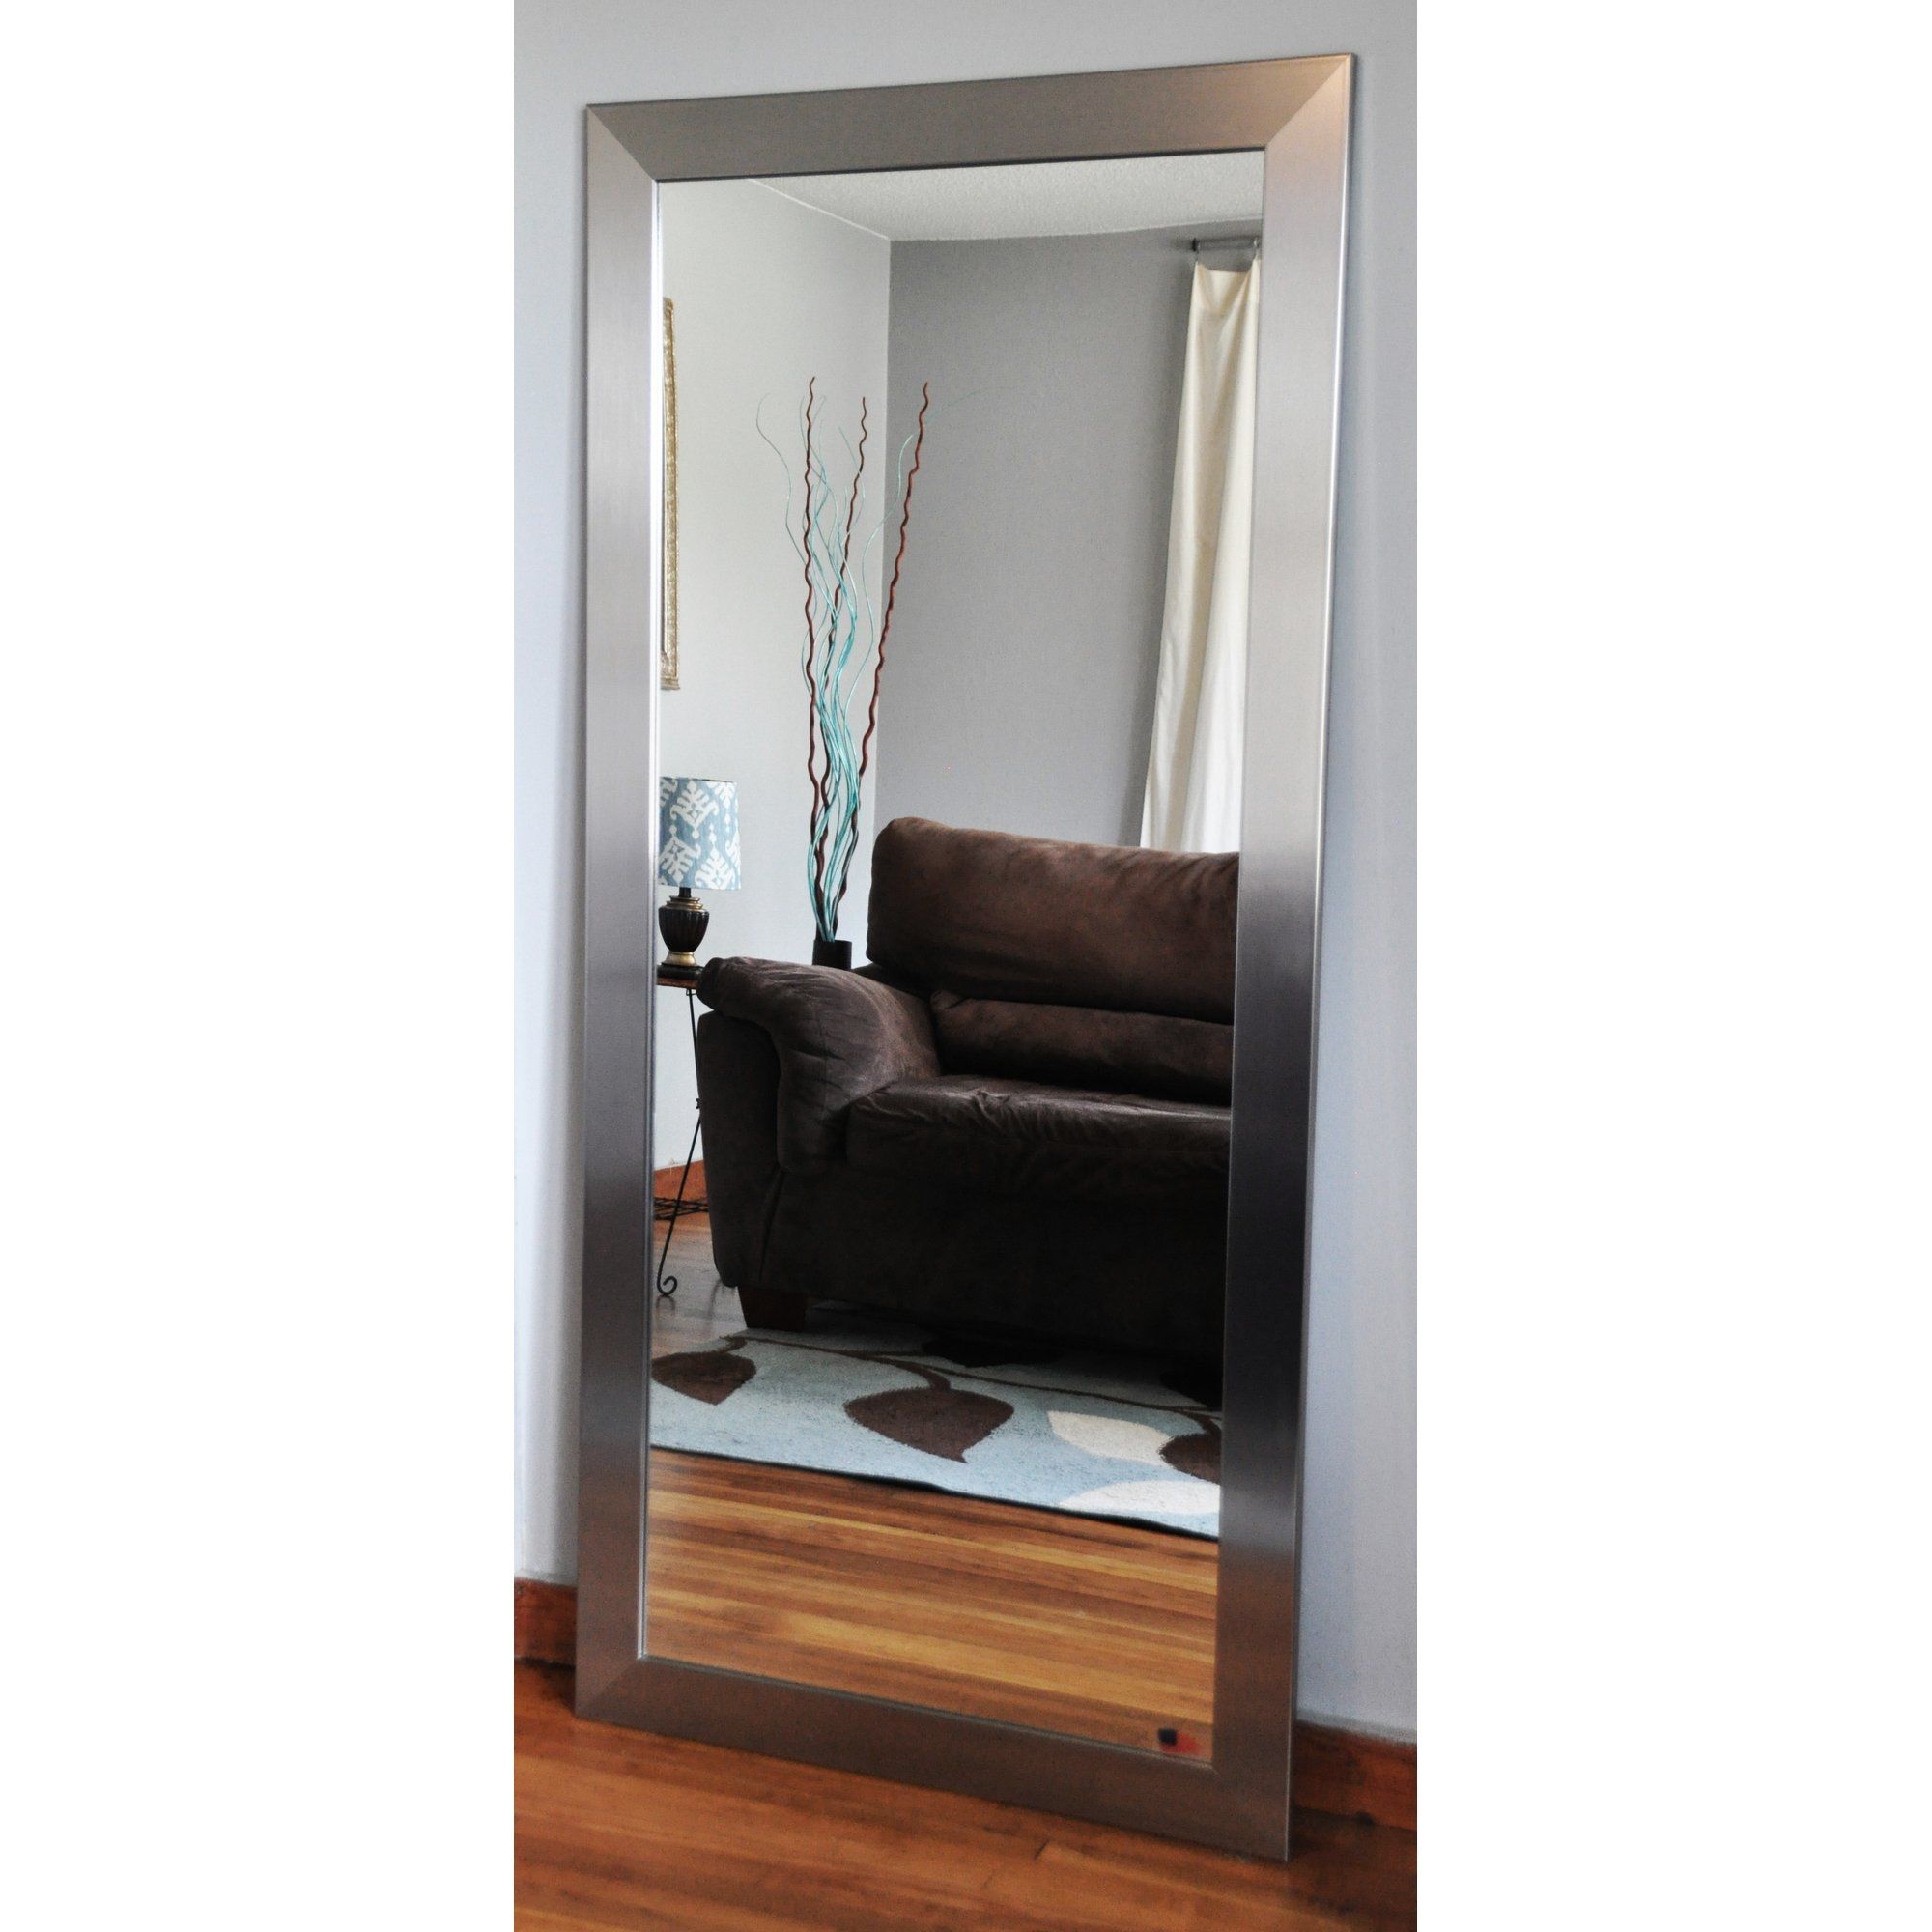 Mirrors Sale Youll Love Wayfair Intended For Antique Looking Mirrors For Sale (View 11 of 15)